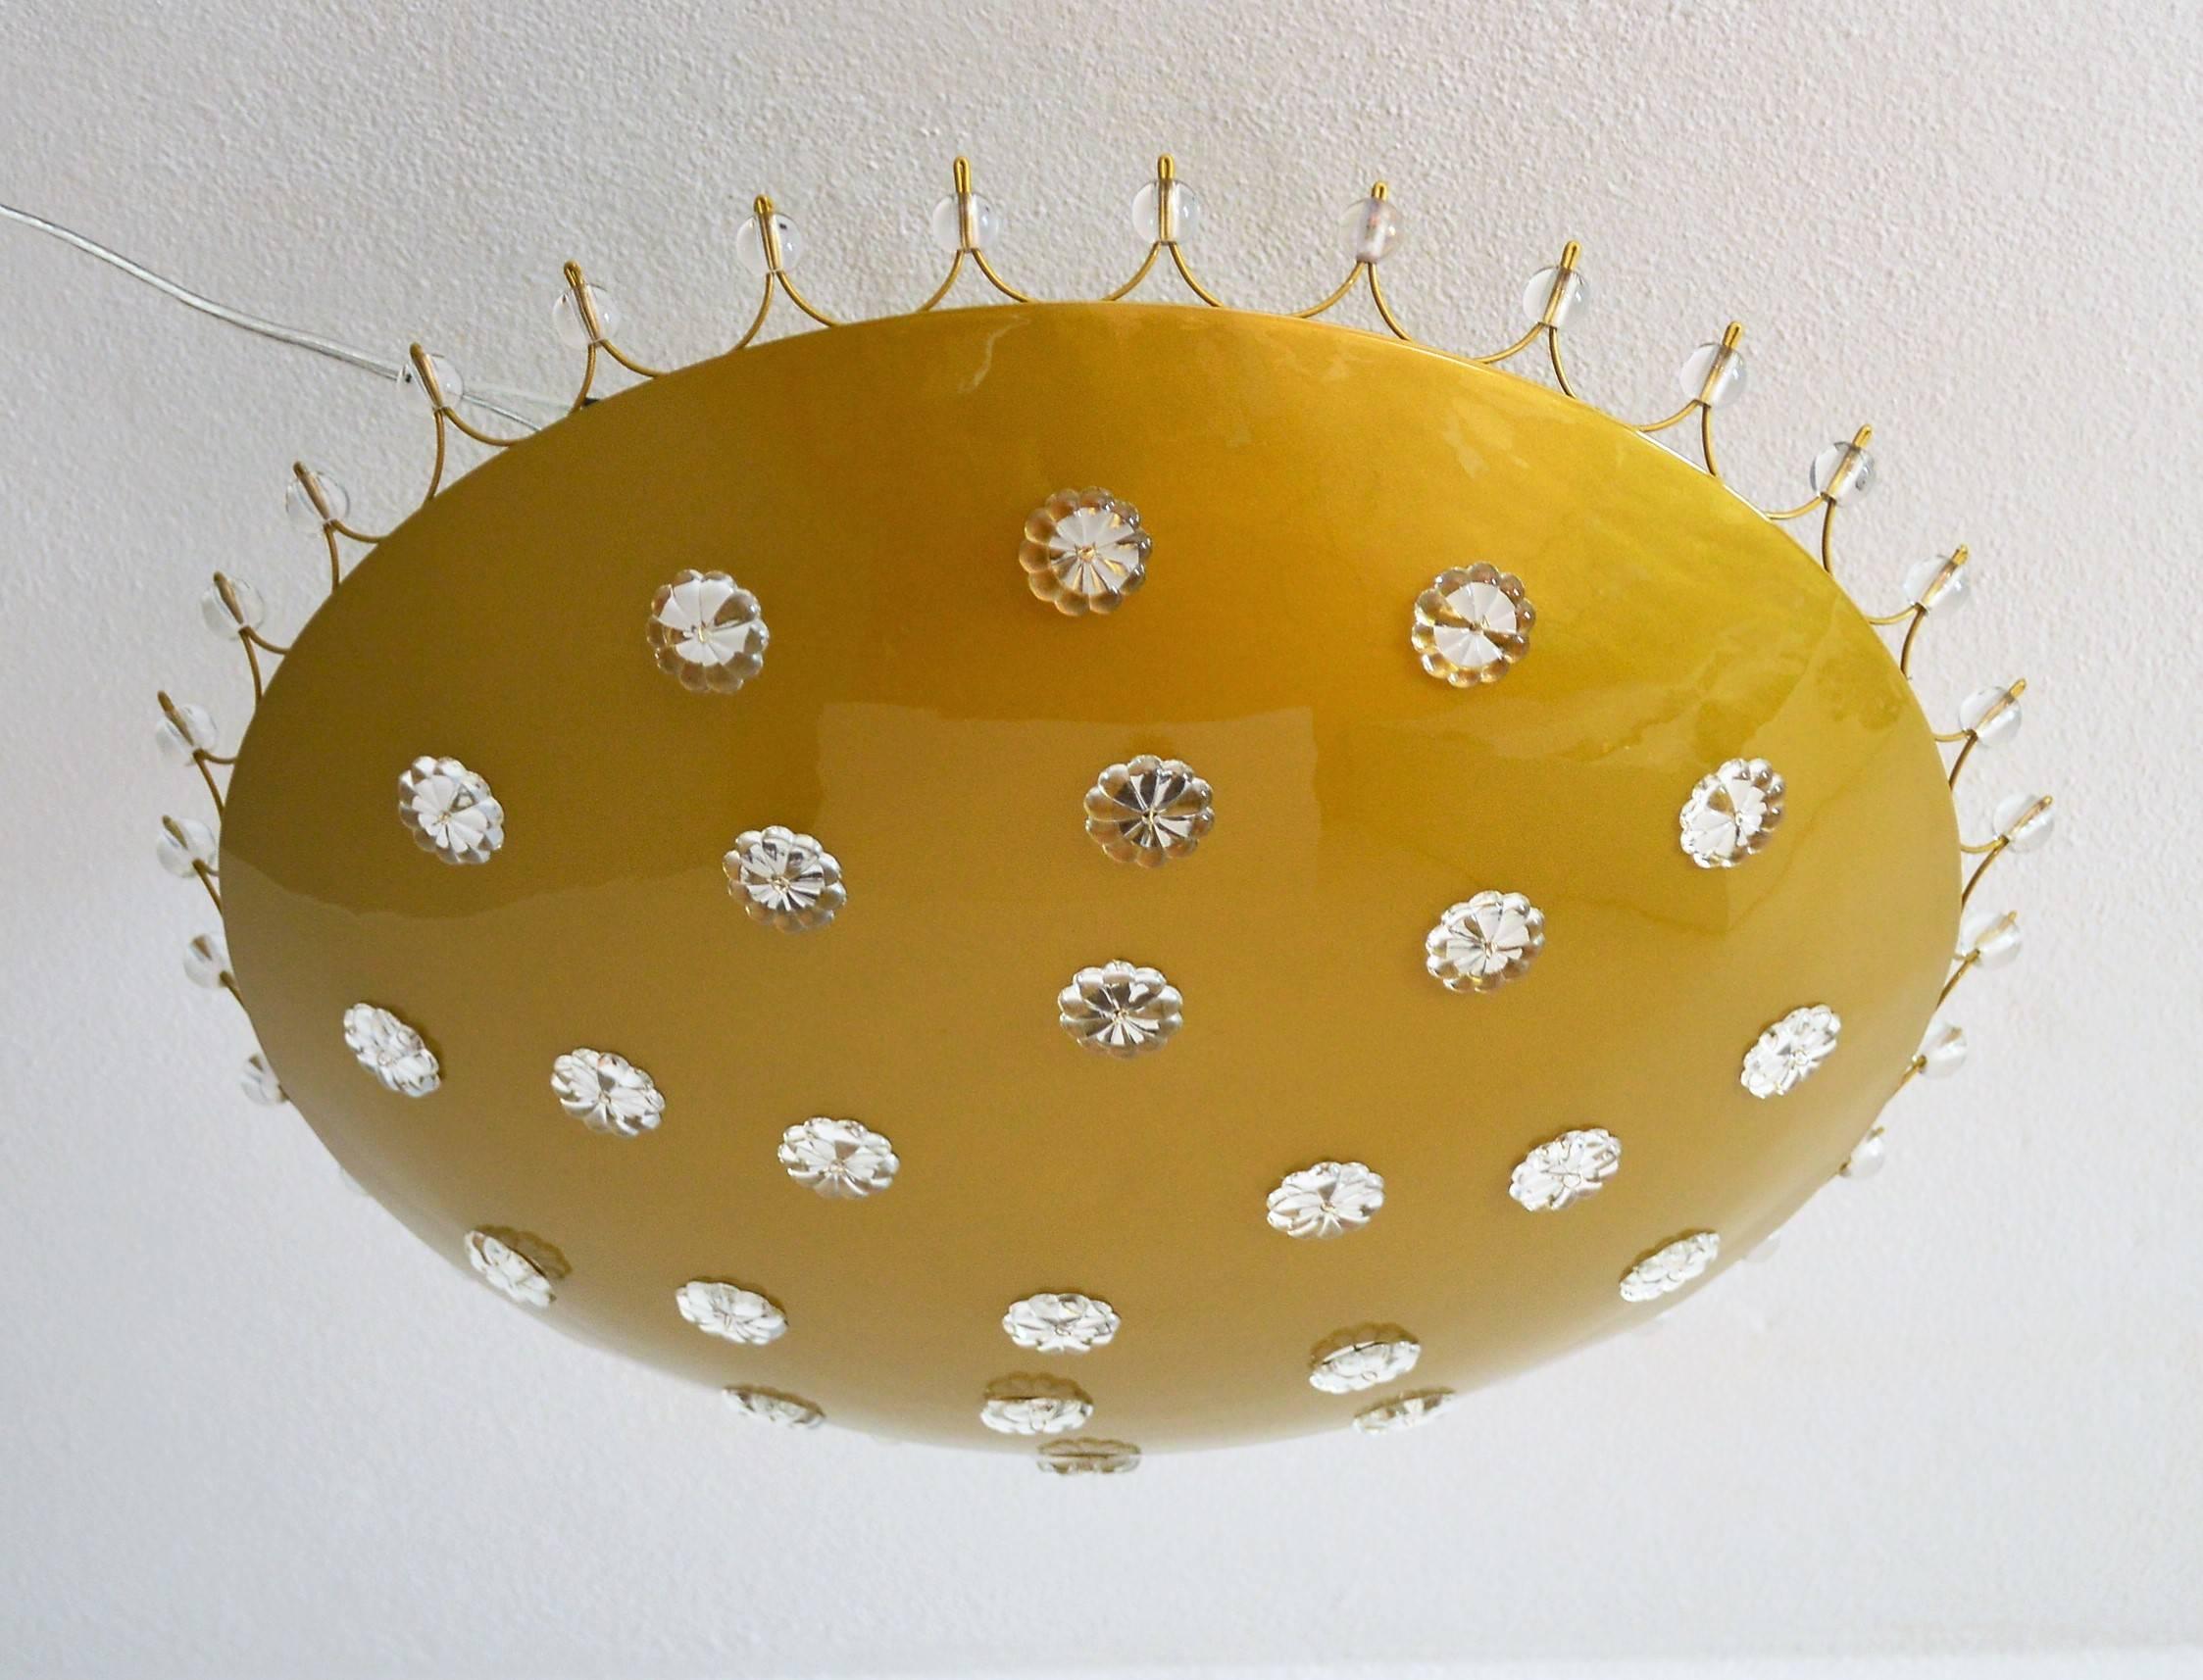 A stunning midcentury flush mount lighting or ceiling lamp designed by Emil Stejnar in the 1950s for Rupert Nikoll, Vienna, Austria.
Made of a dome-shaped metal base with transparent glass flowers and glass pearls around the ceiling crown.
When